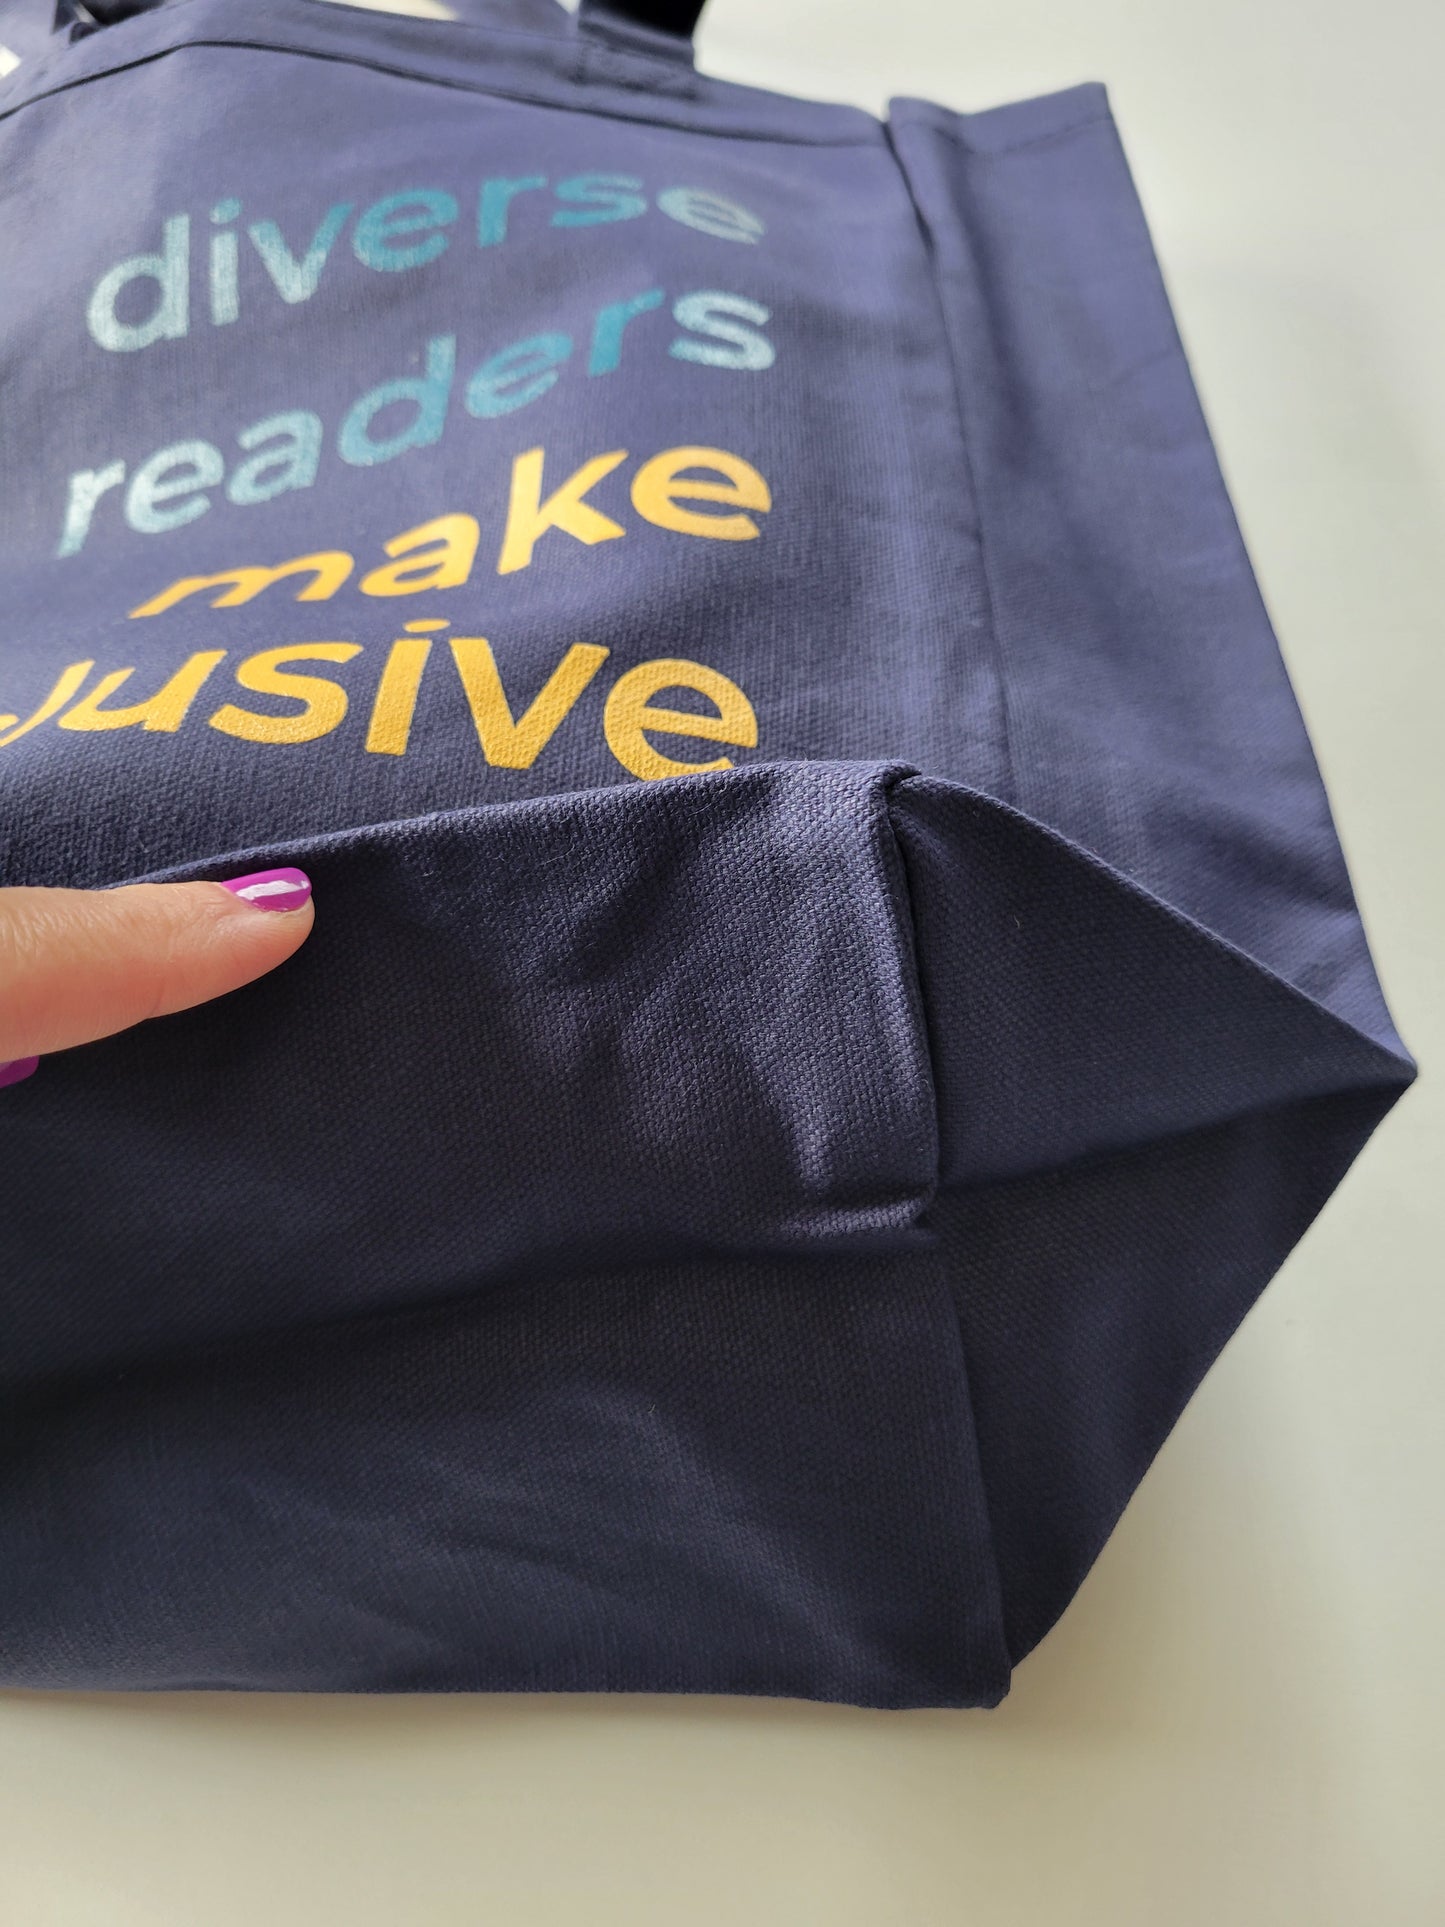 Diverse Readers Make Inclusive Leaders- Navy Tote bag with Blue & Yellow Lettering